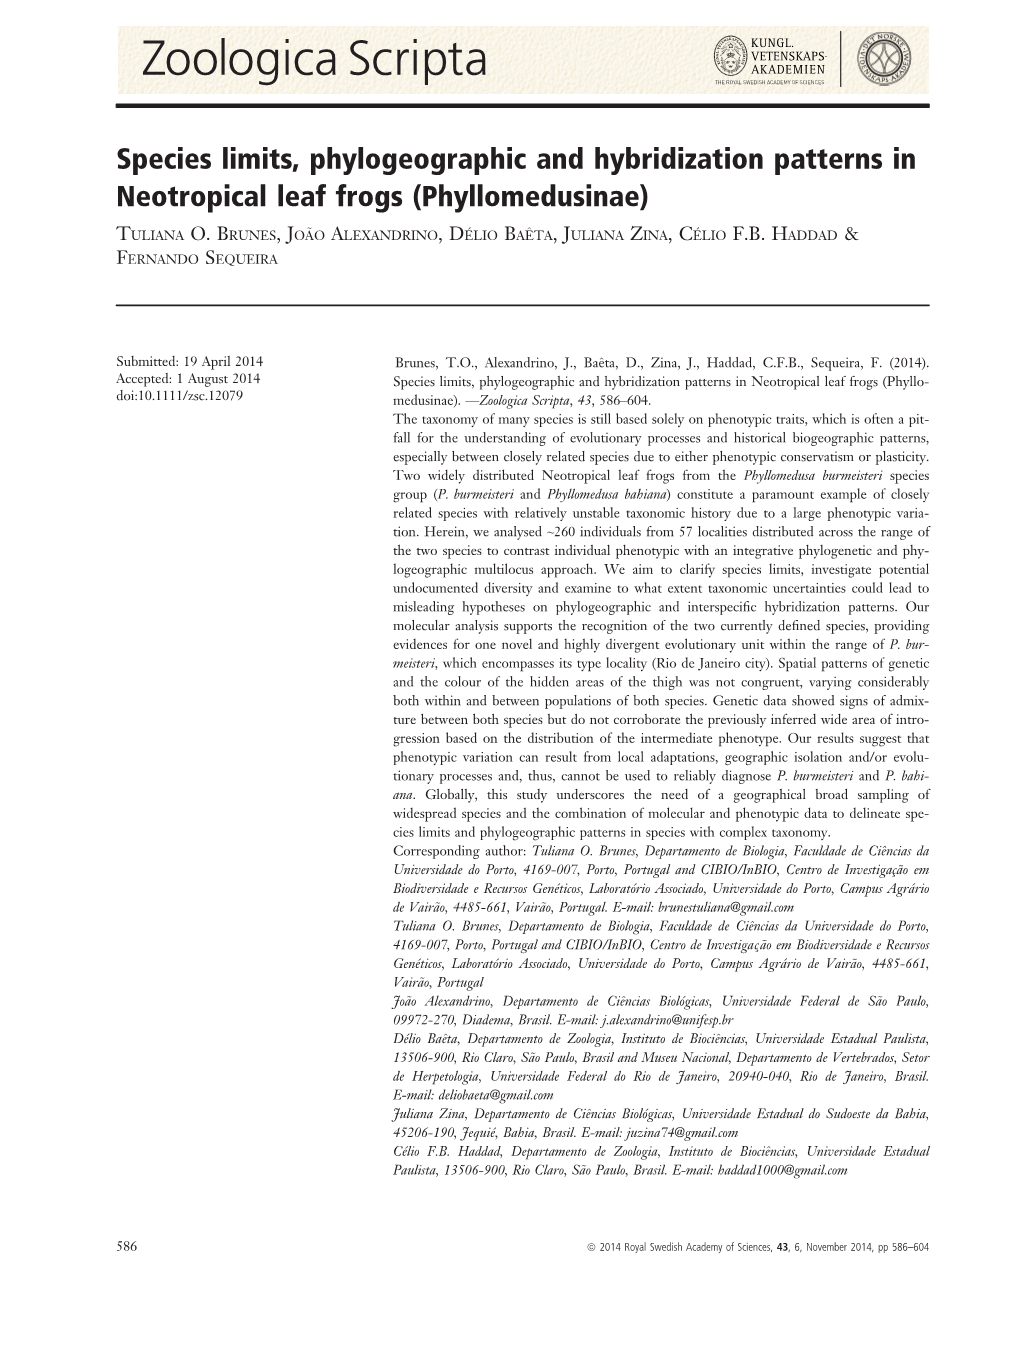 Species Limits, Phylogeographic and Hybridization Patterns in Neotropical Leaf Frogs (Phyllomedusinae) ~ � ^ � TULIANA O